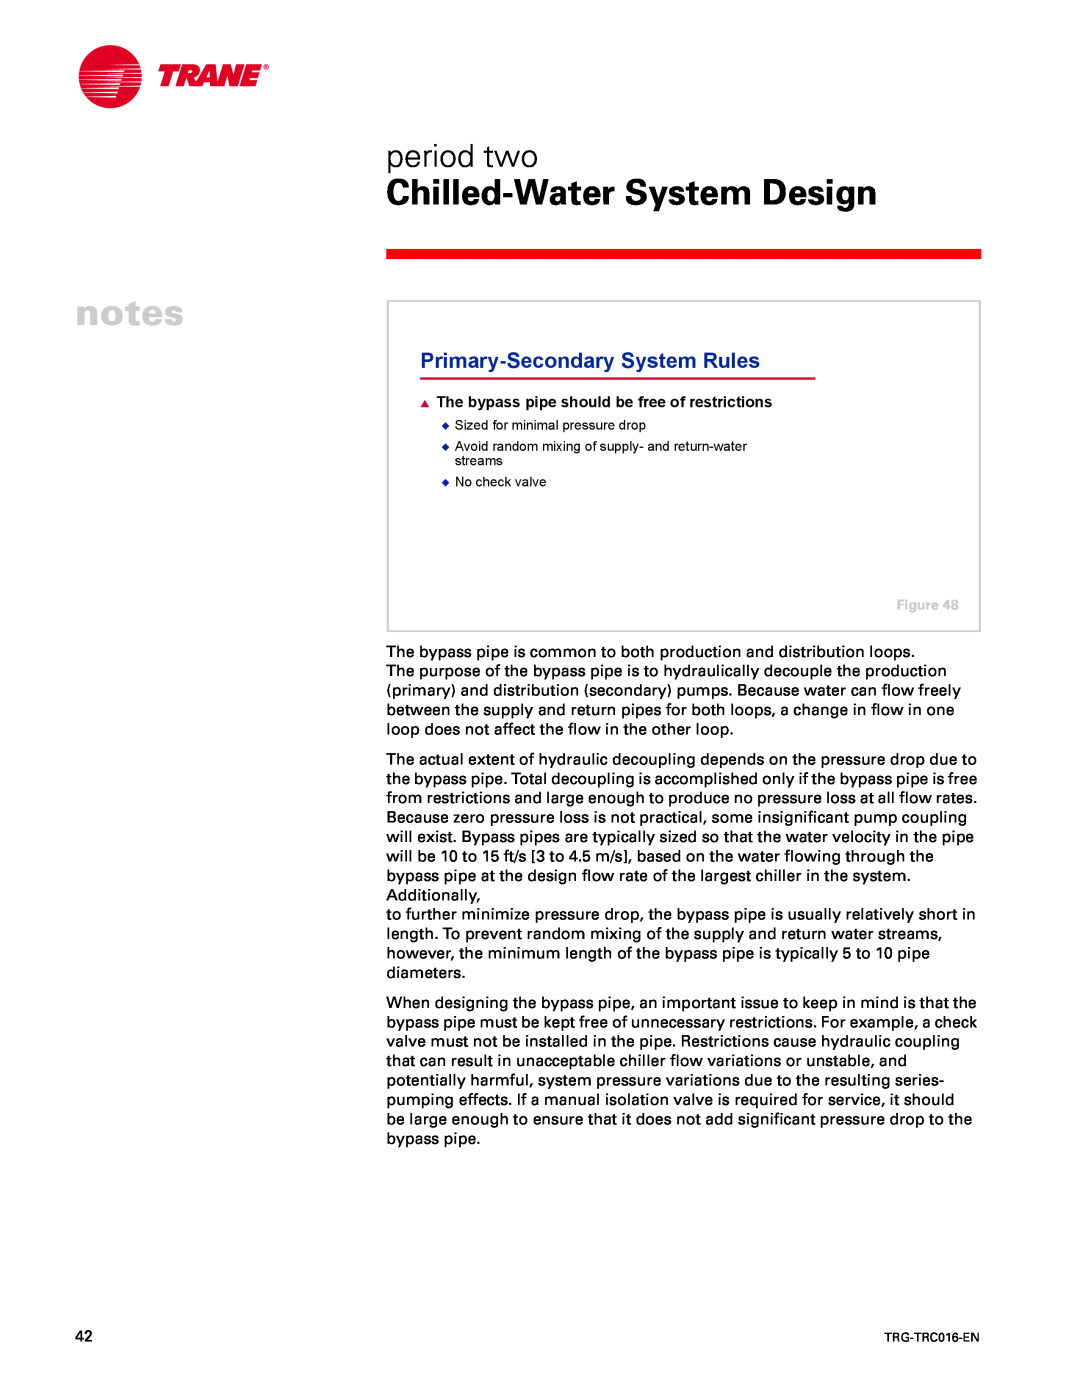 Trane TRG-TRC016-EN manual Primary-SecondarySystem Rules, notes, Chilled-WaterSystem Design, period two 